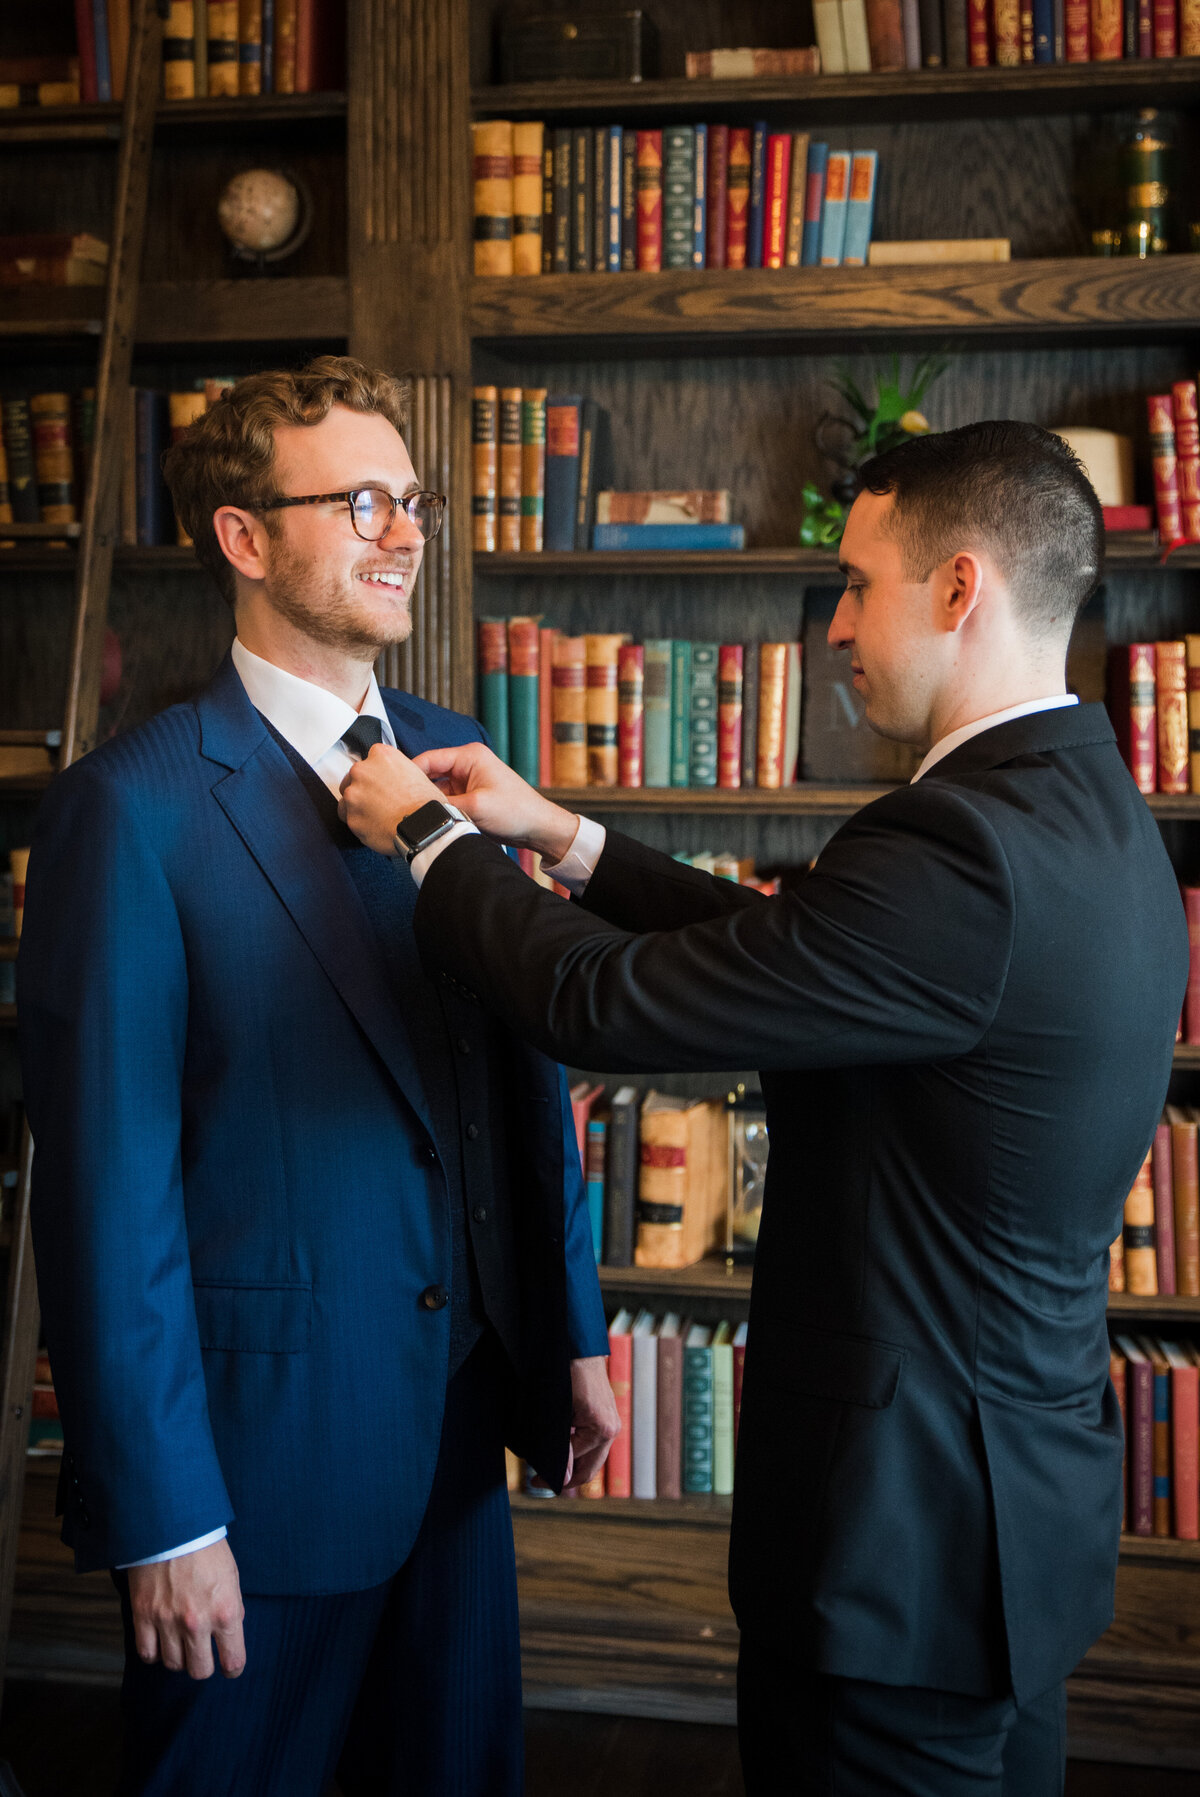 A groom's best man helps him adjust his tie in the library at The Manor House in Littleton, Colorado.